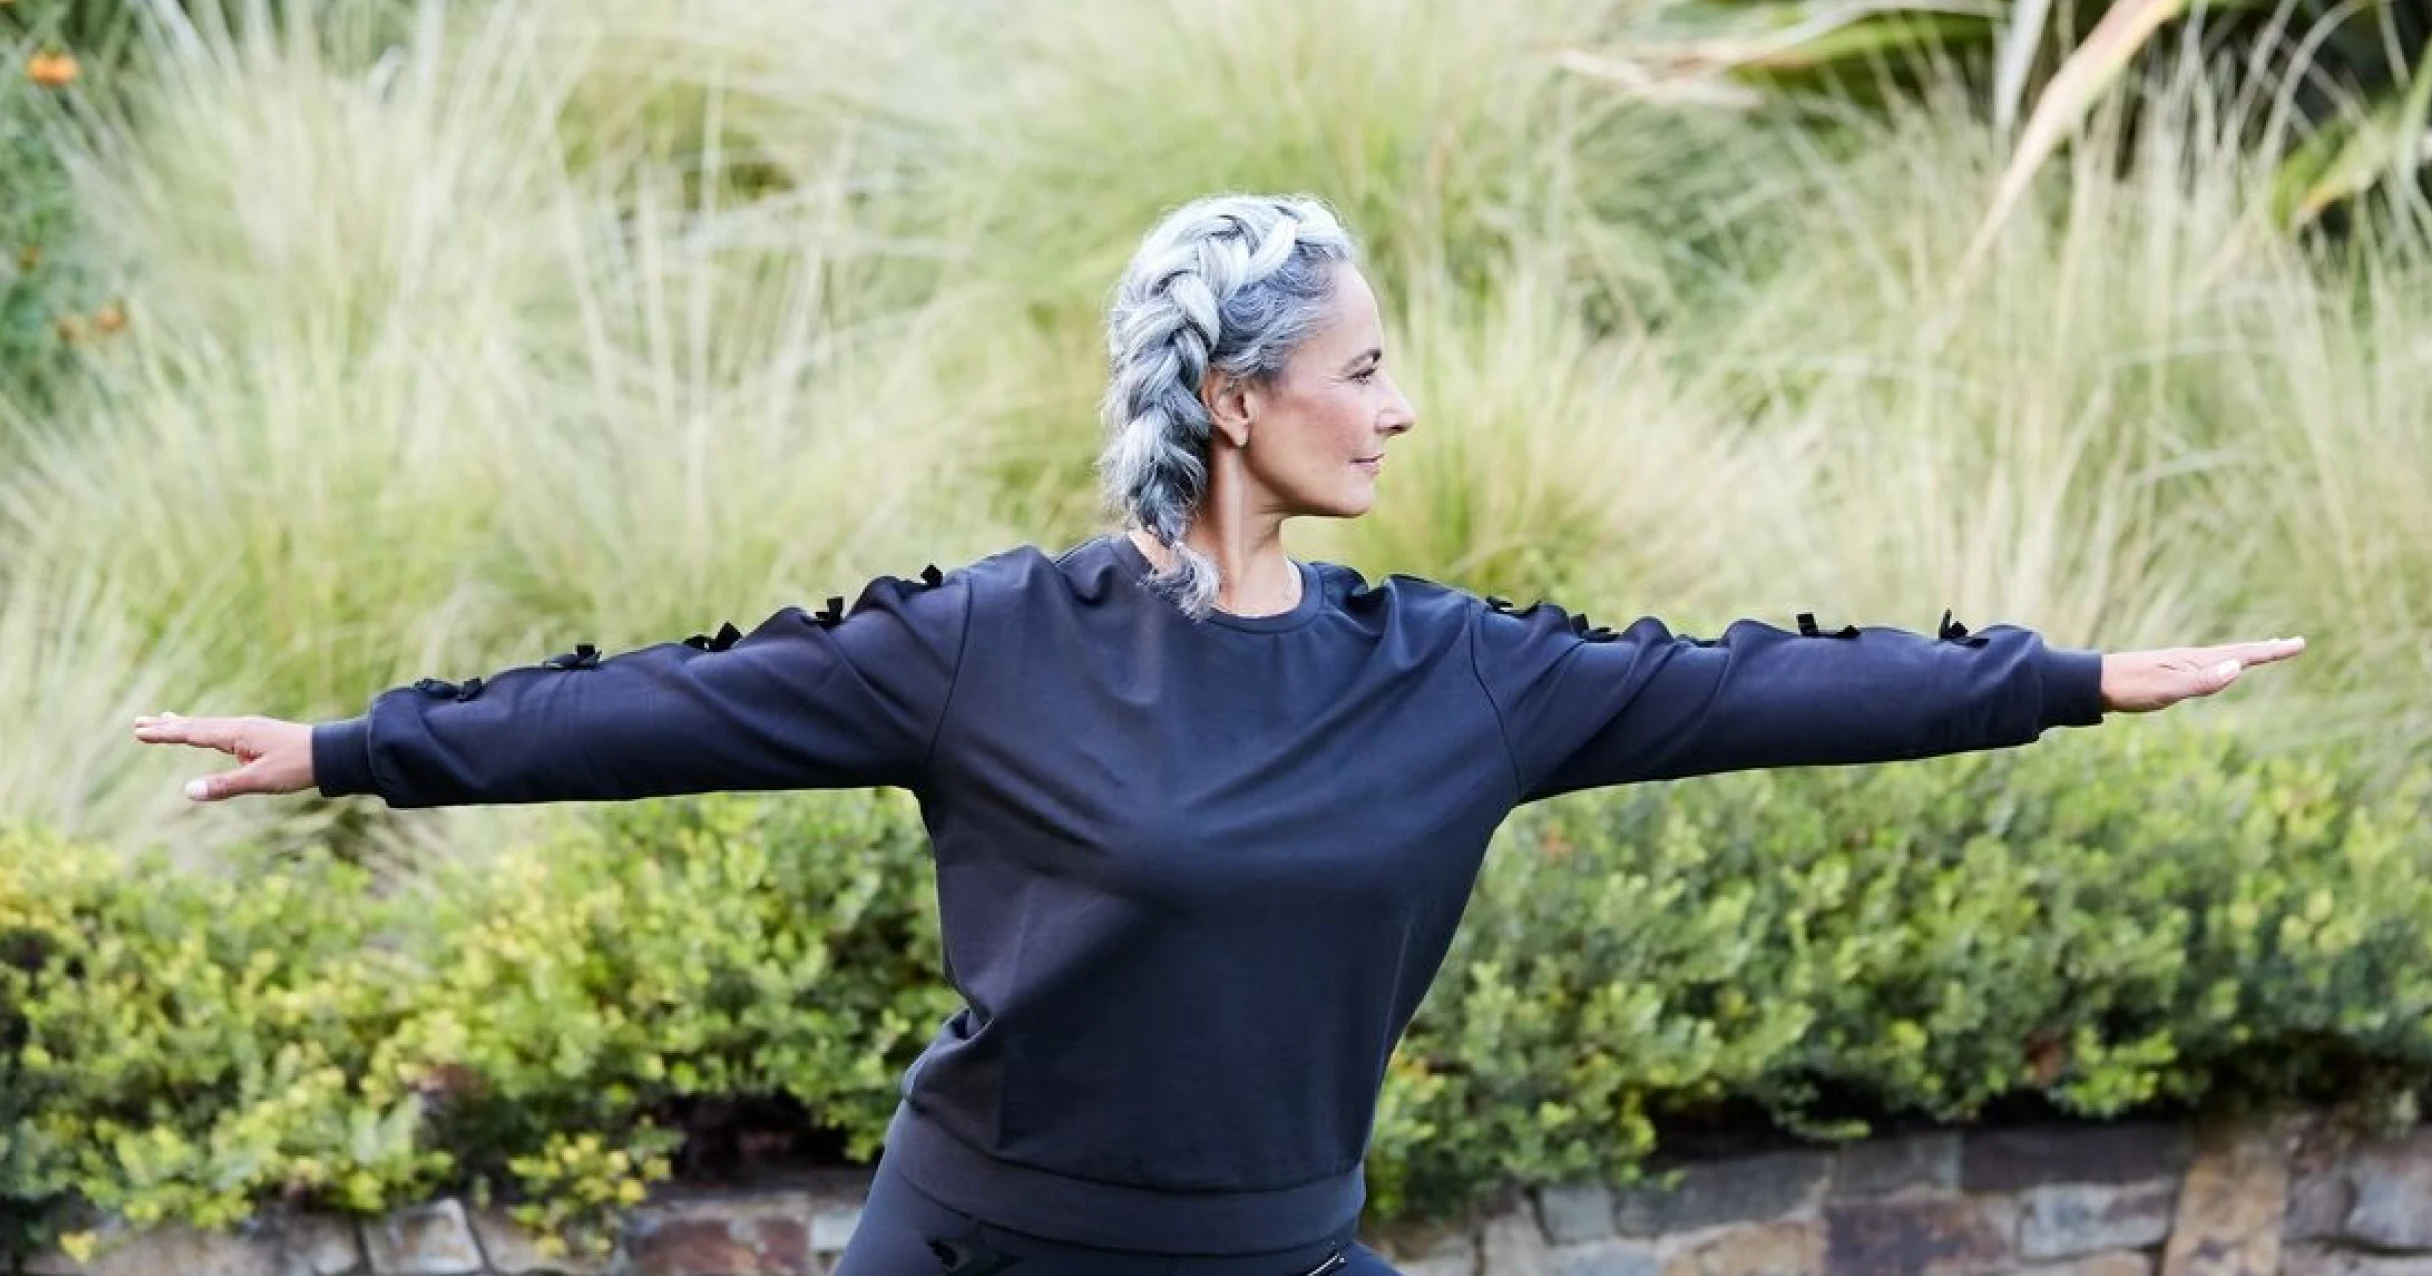 Woman with silver french braid wearing a navy long sleeve top doing warrior pose in front of a lush green background